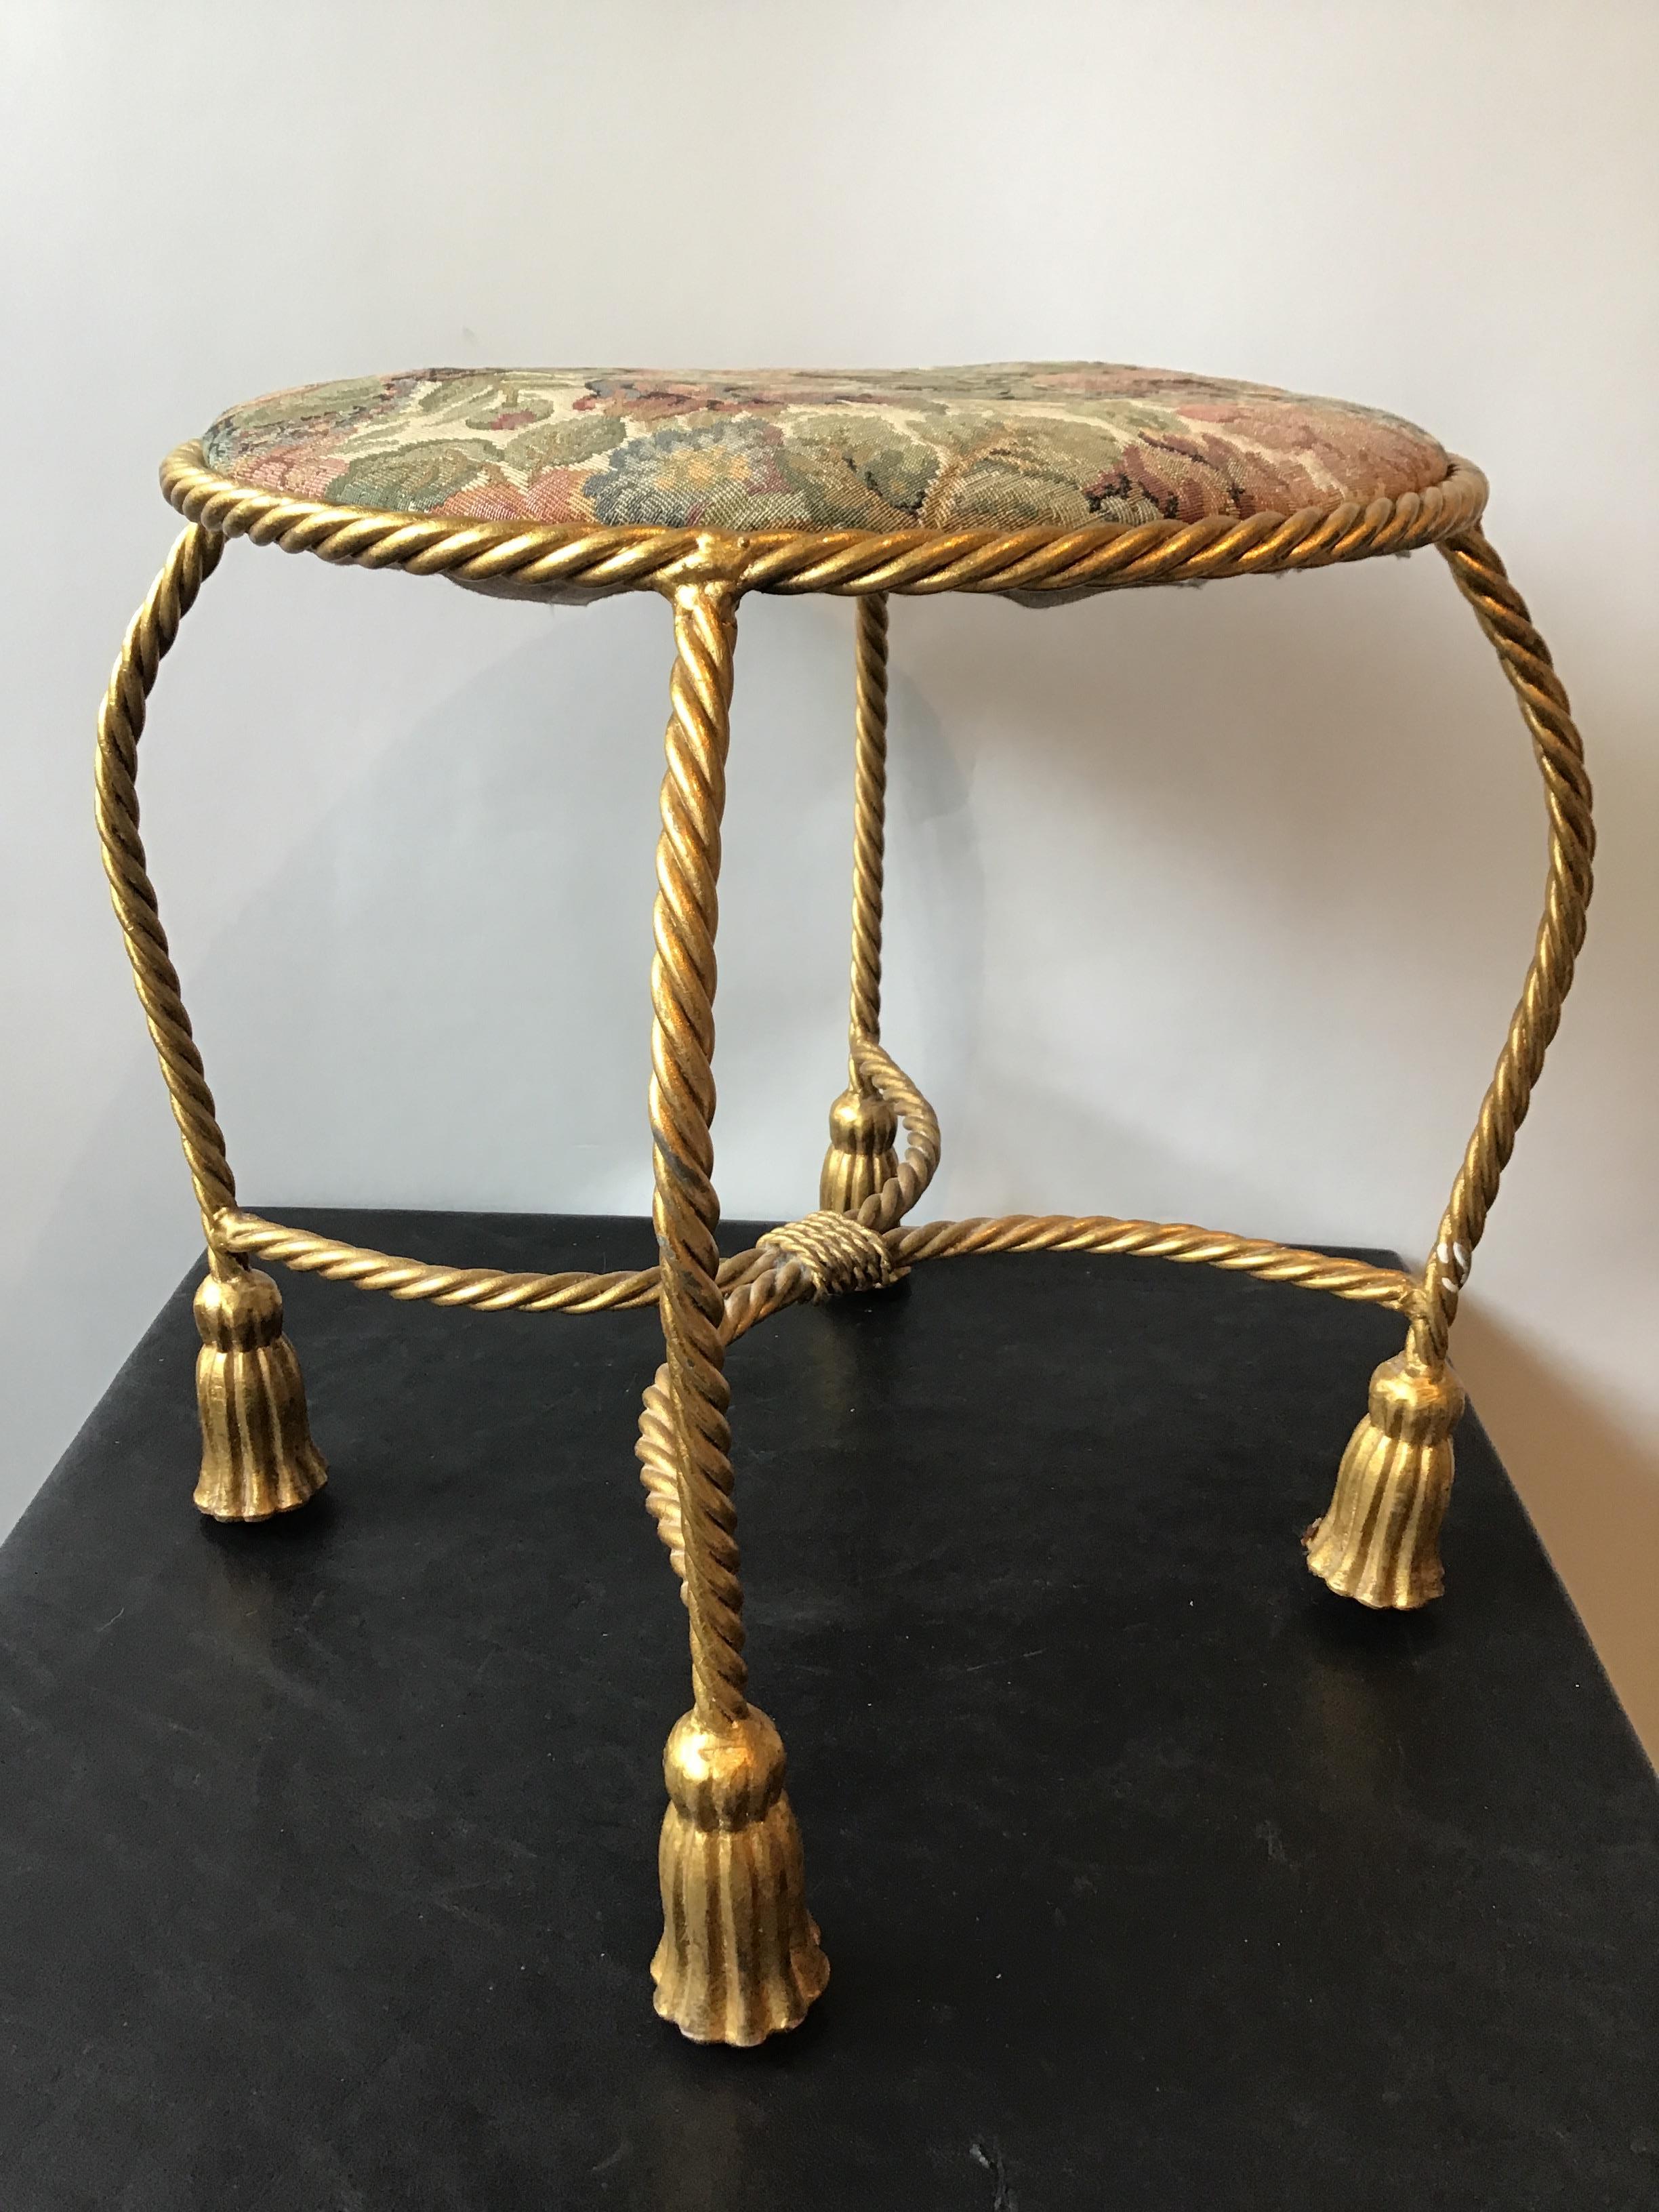 1960s Italian Gilt Iron Tassel Bench In Good Condition For Sale In Tarrytown, NY